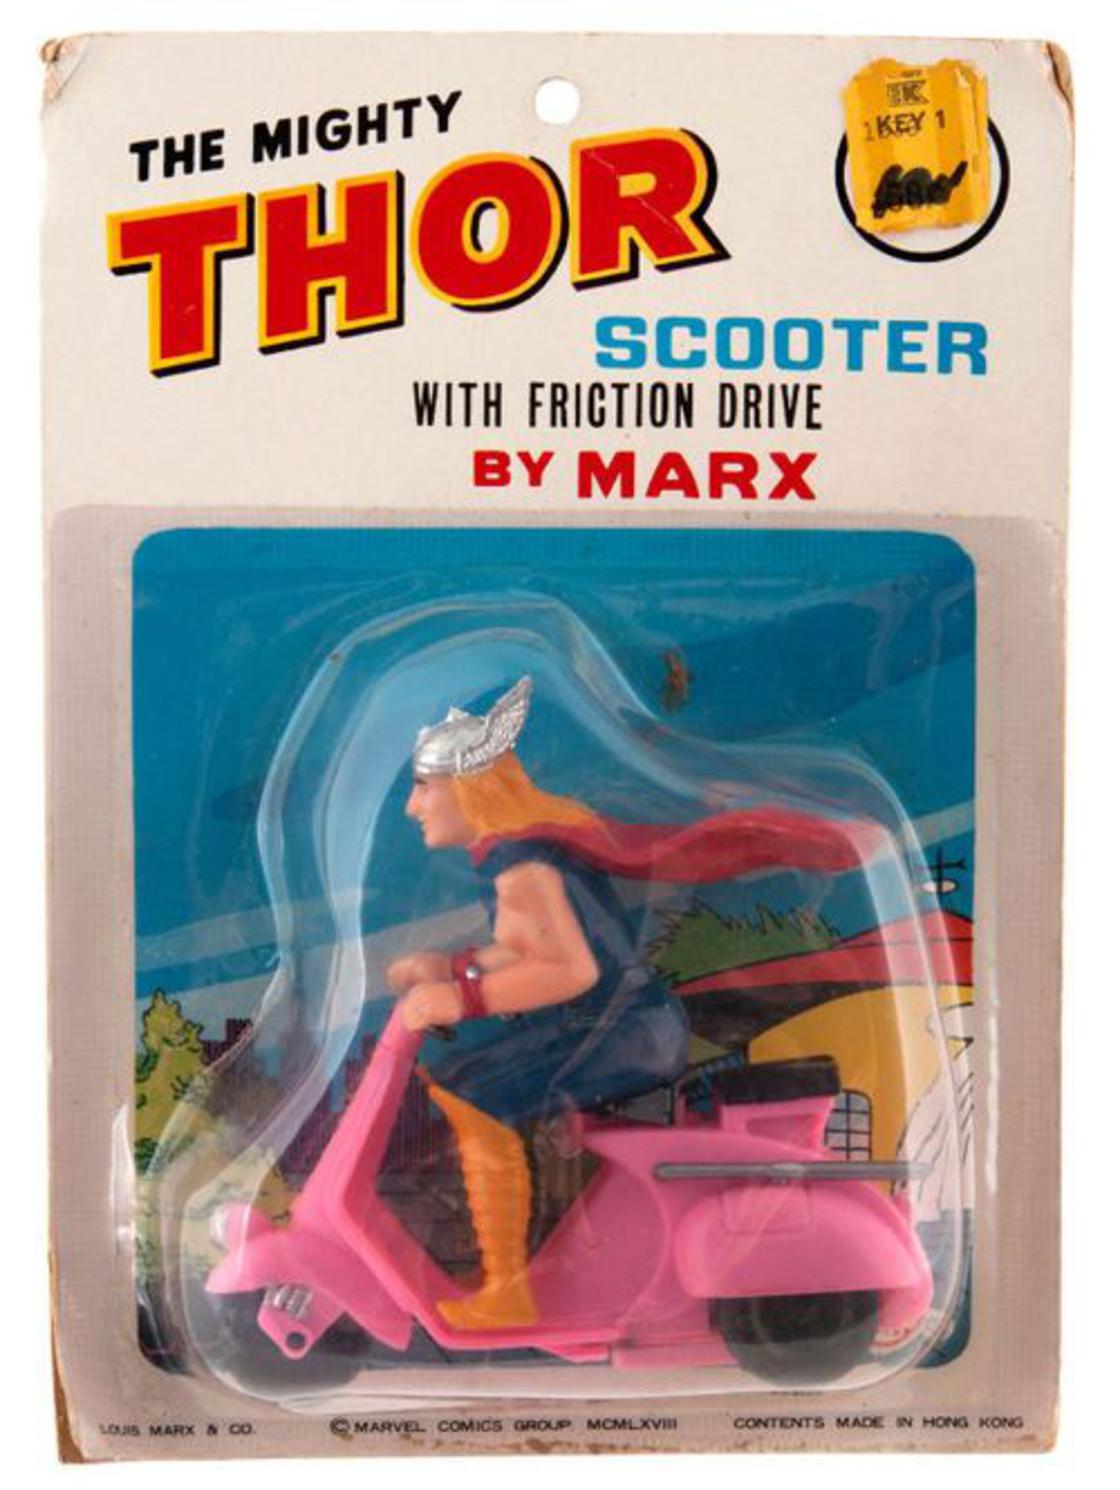 thor scooter - Key 1 The Mighty Thor Thor Scooter With Friction Drive By Marx 35 Marx & Co Marvel Comics Group Mcmlxv Contents Made W Hong Kong